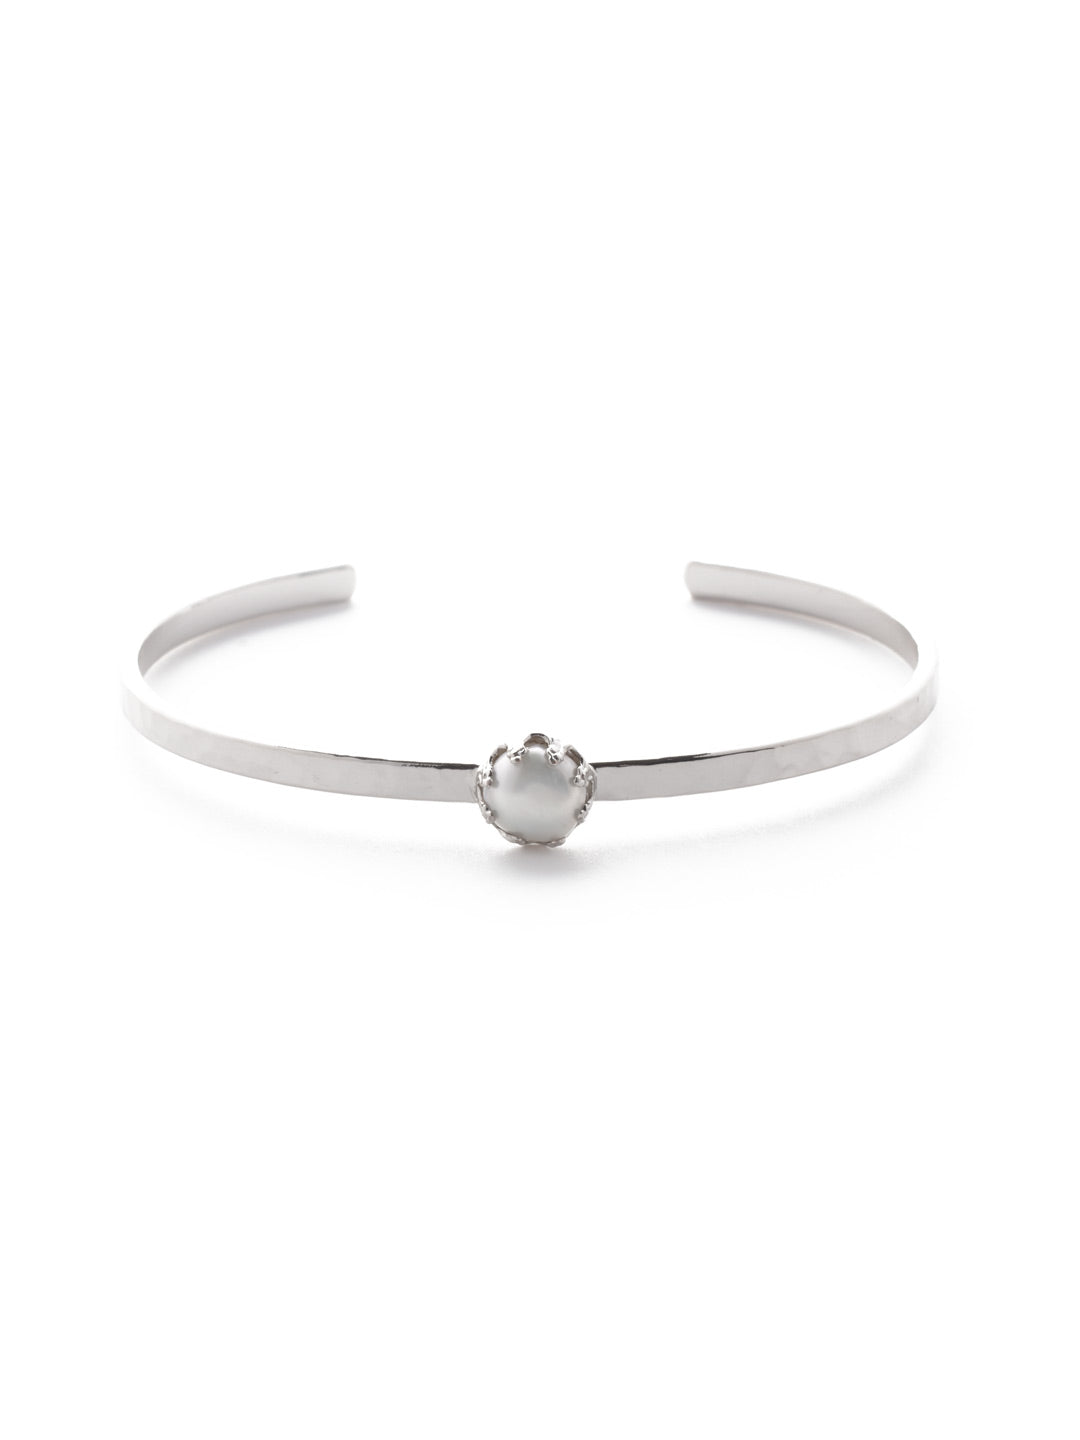 Aida Cuff Bracelet - BEV105PDCRY - <p>The Aida Cuff Bracelet features a single freshwater pearl on an adjustable cuff band. The dainty design makes it perfect for layering! From Sorrelli's Crystal collection in our Palladium finish.</p>